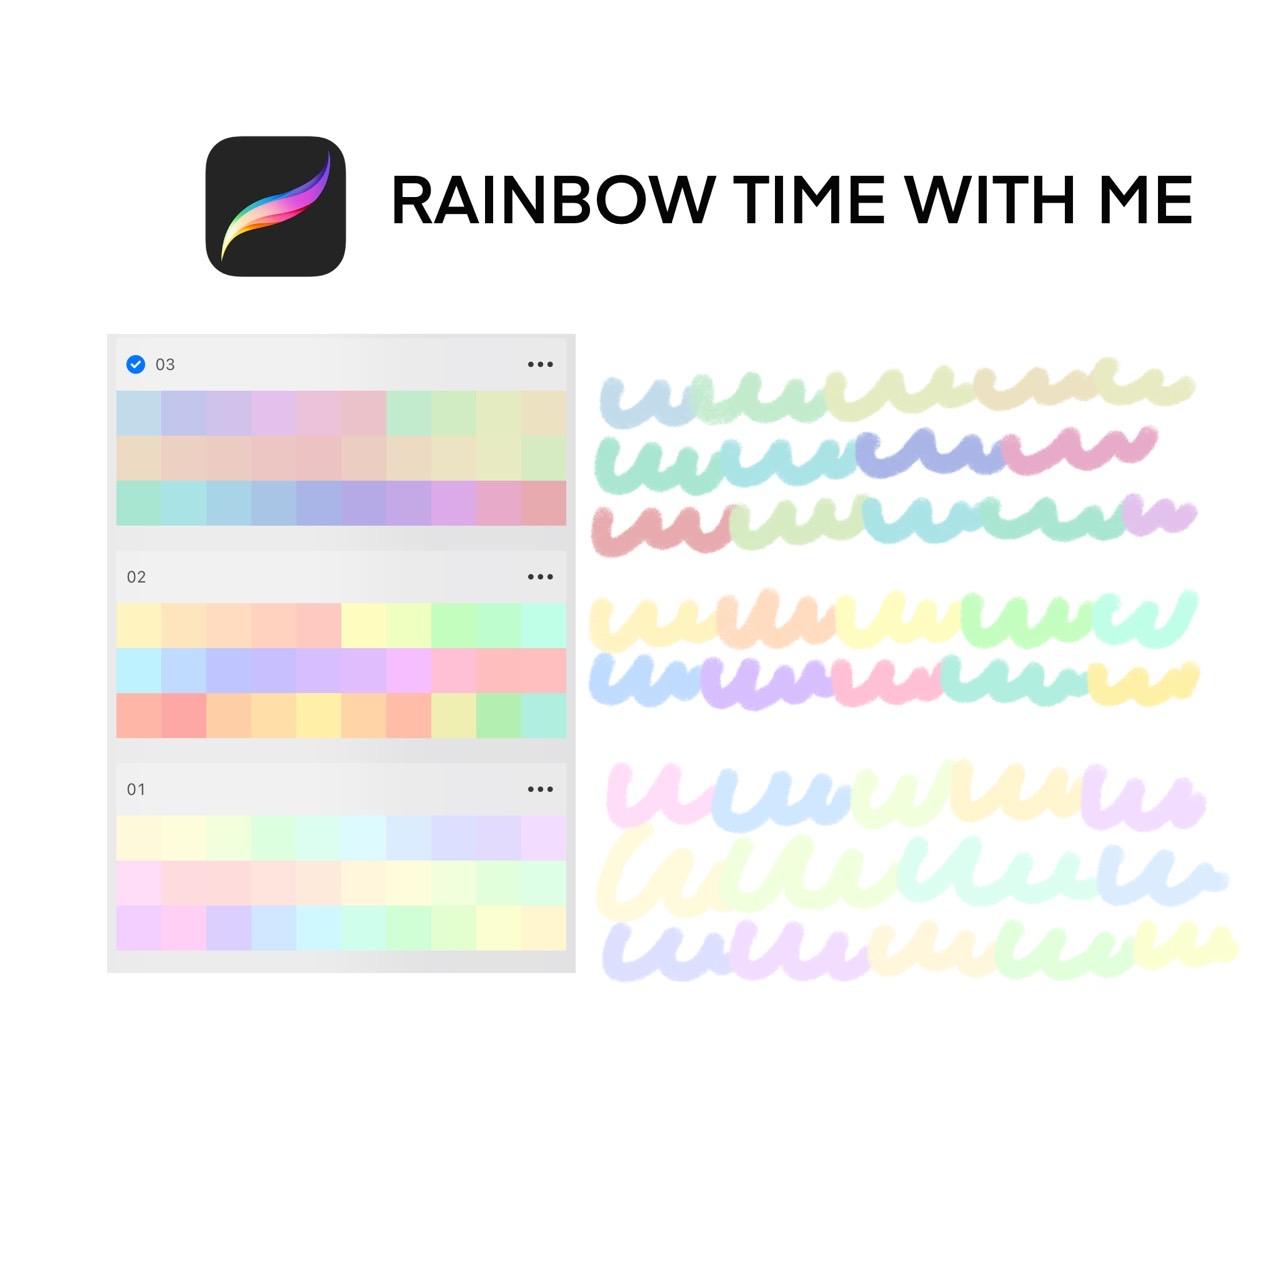 RAINBOW TIME WITH ME